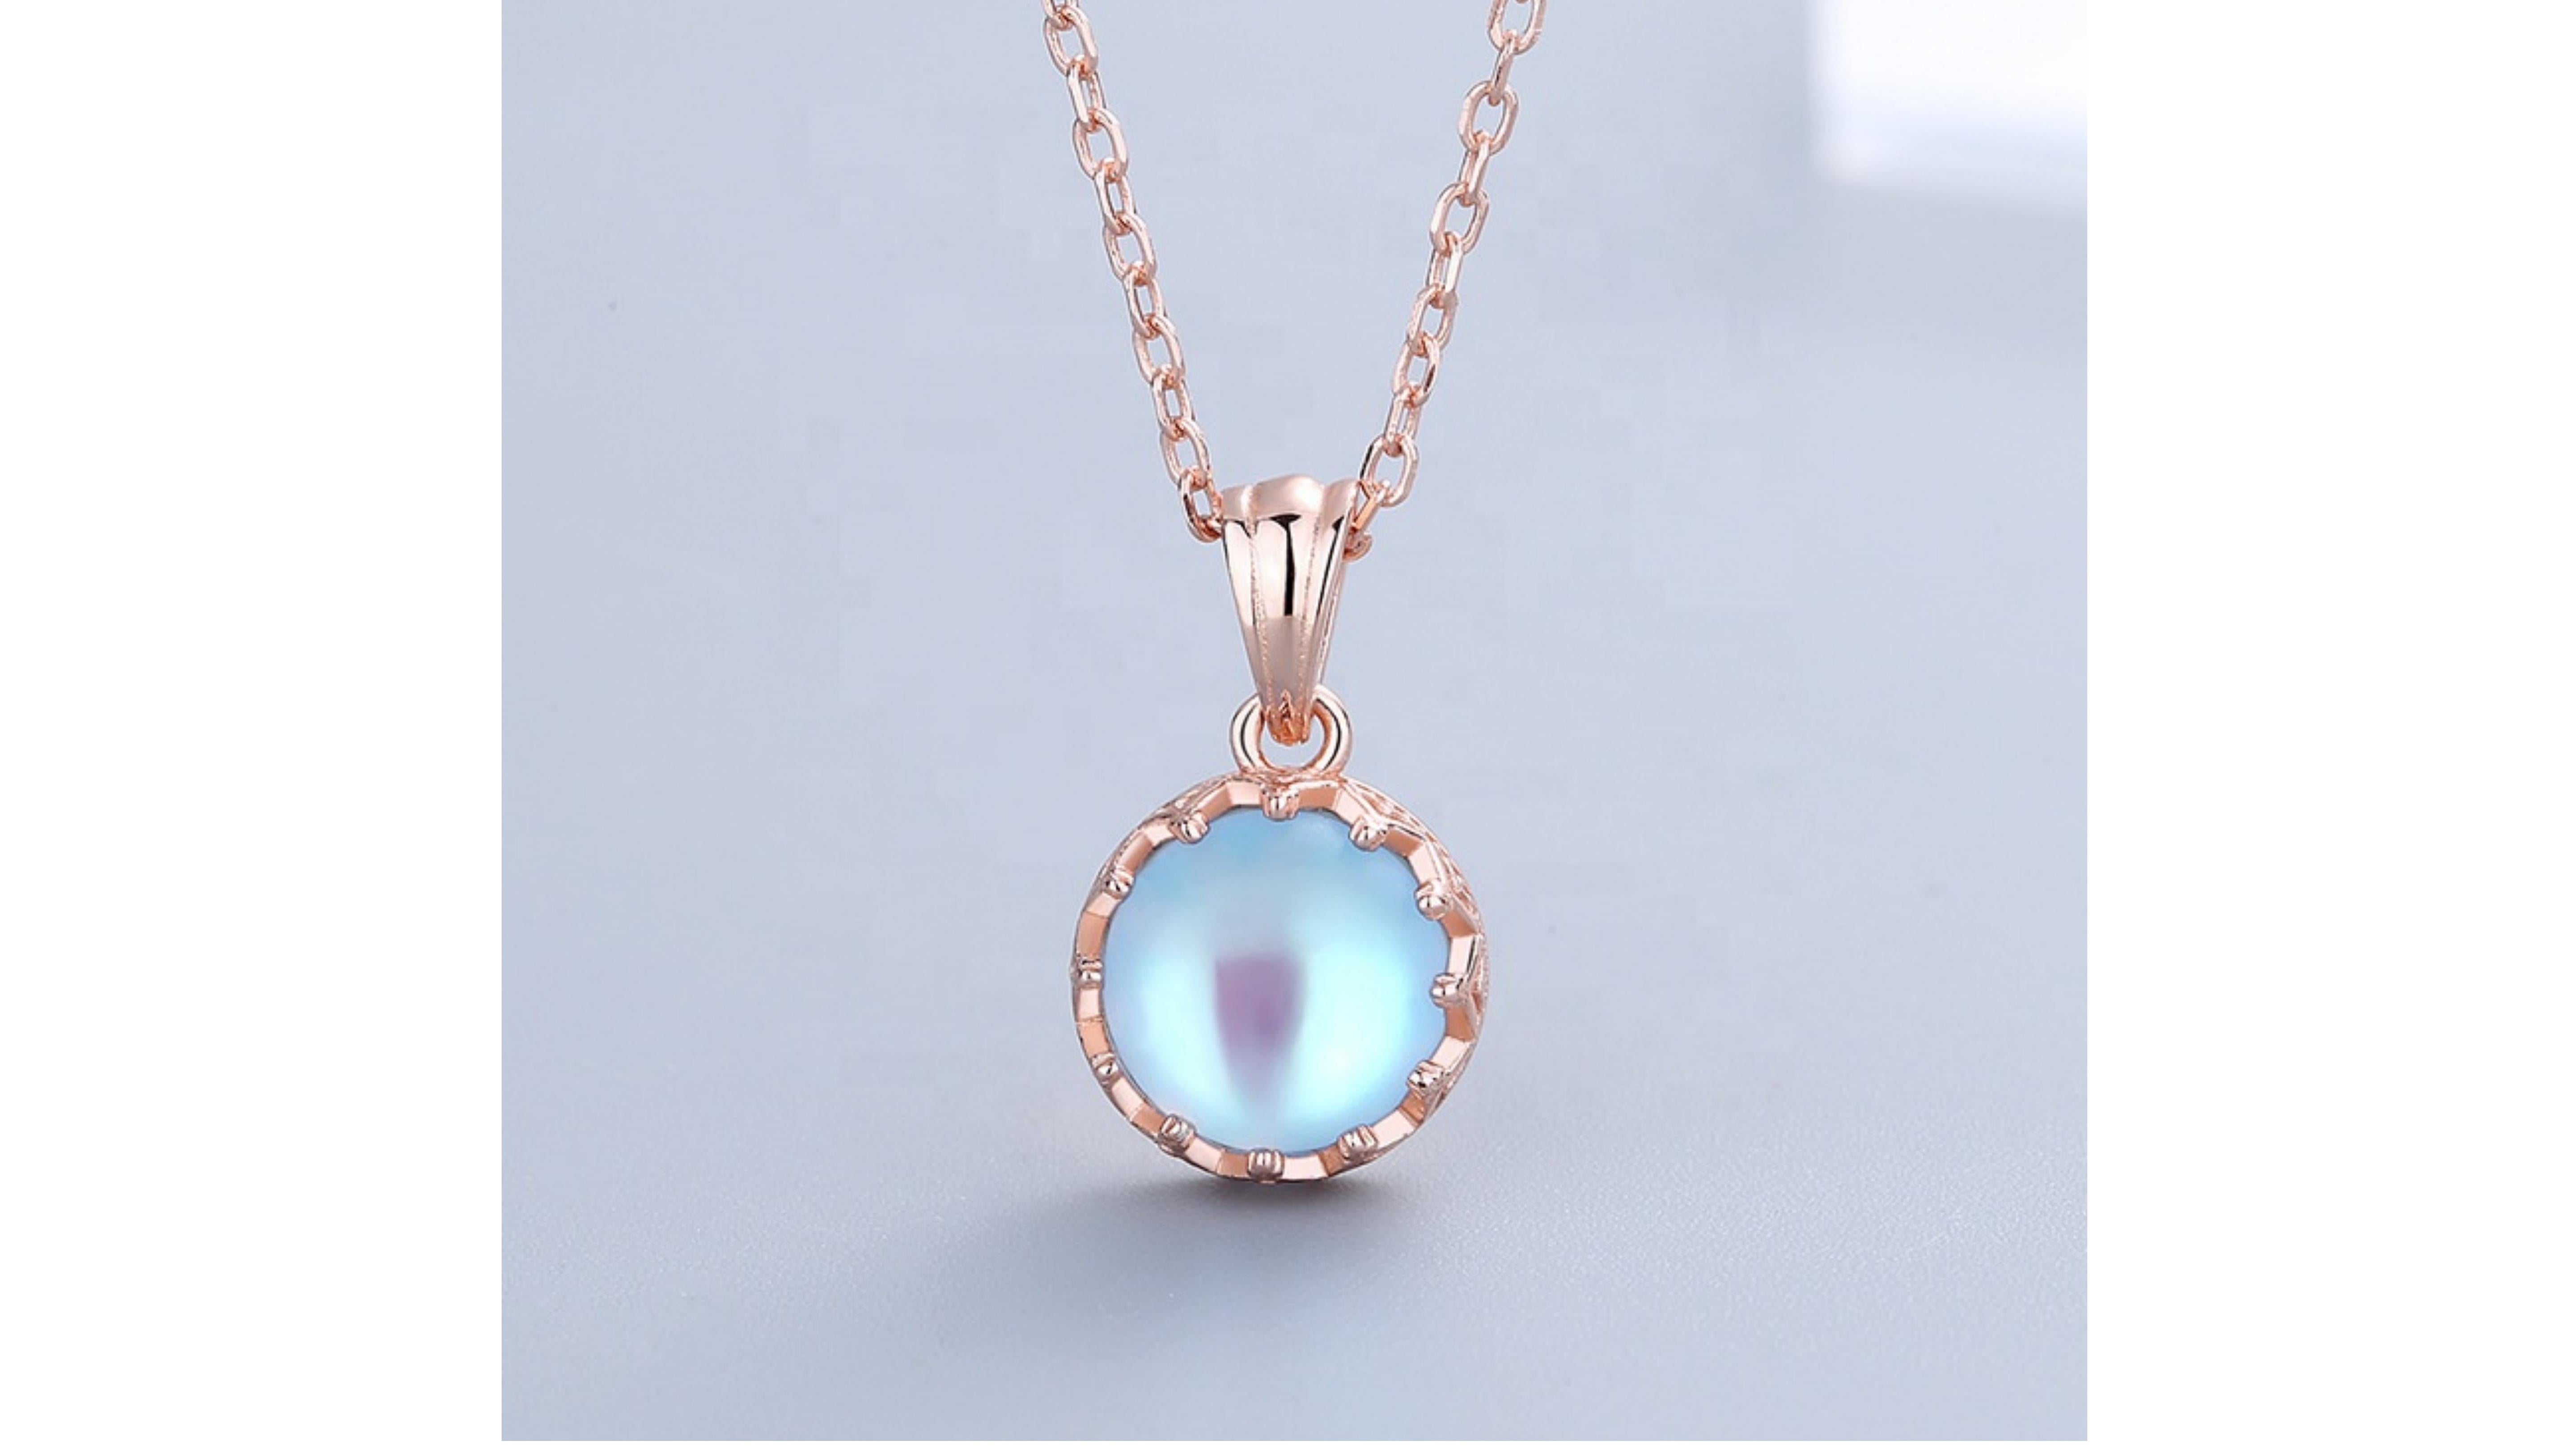 Moonstone Necklaces with accent stones set in Rose Gold Plated  with a option of Sterling Silver .

Its story begins in ancient Rome, where it was believed moonstone was formed from solidified beams of moonlight. They also held that the Roman